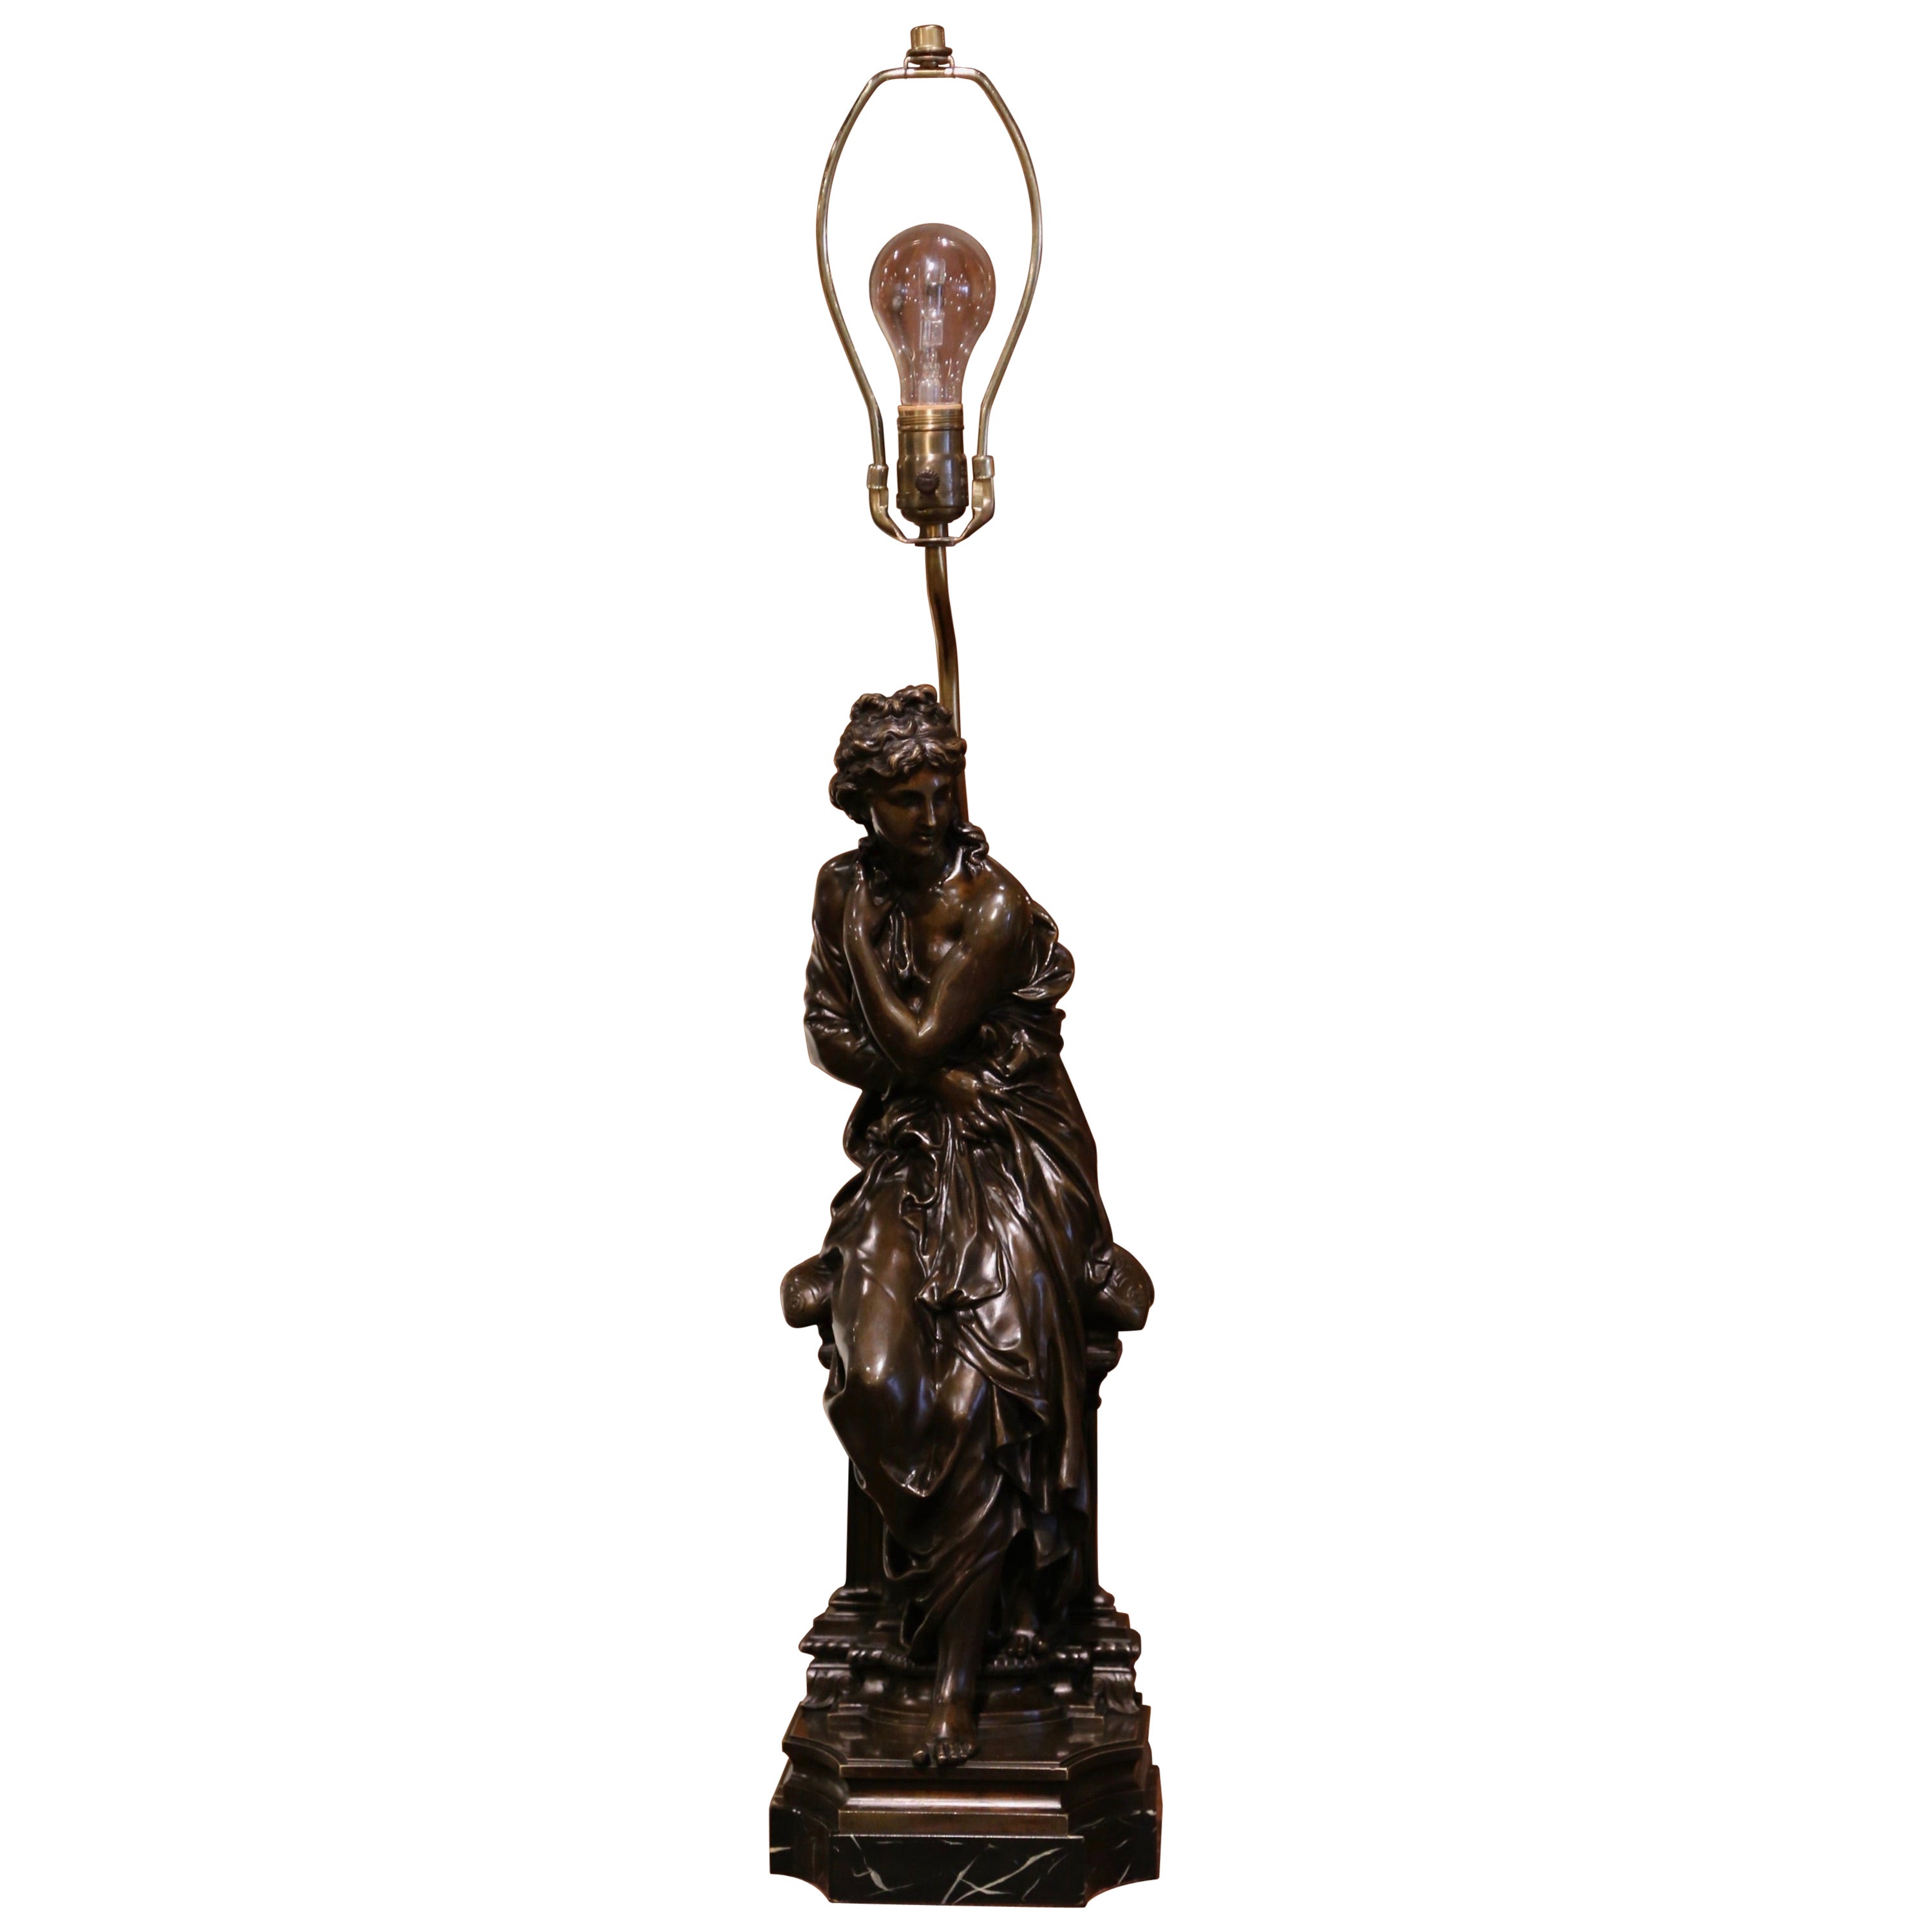 19th Century French Bronze Figure Signed Dumaige Mounted into Table Lamp